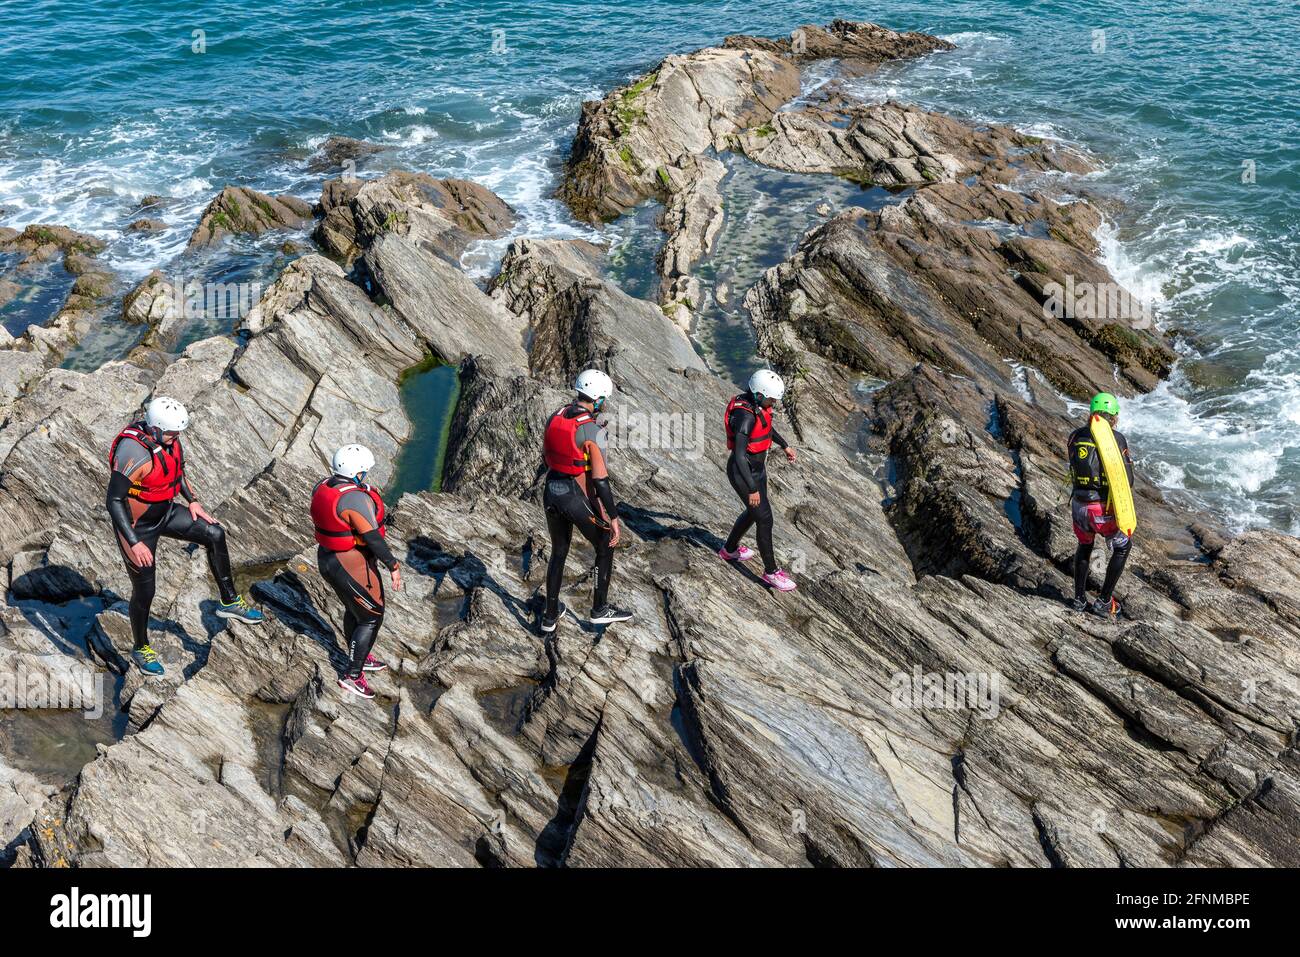 Holidaymakers walking across rocks following their coasteering guide on the coast of Towan Head in Newquay in Cornwall. Stock Photo